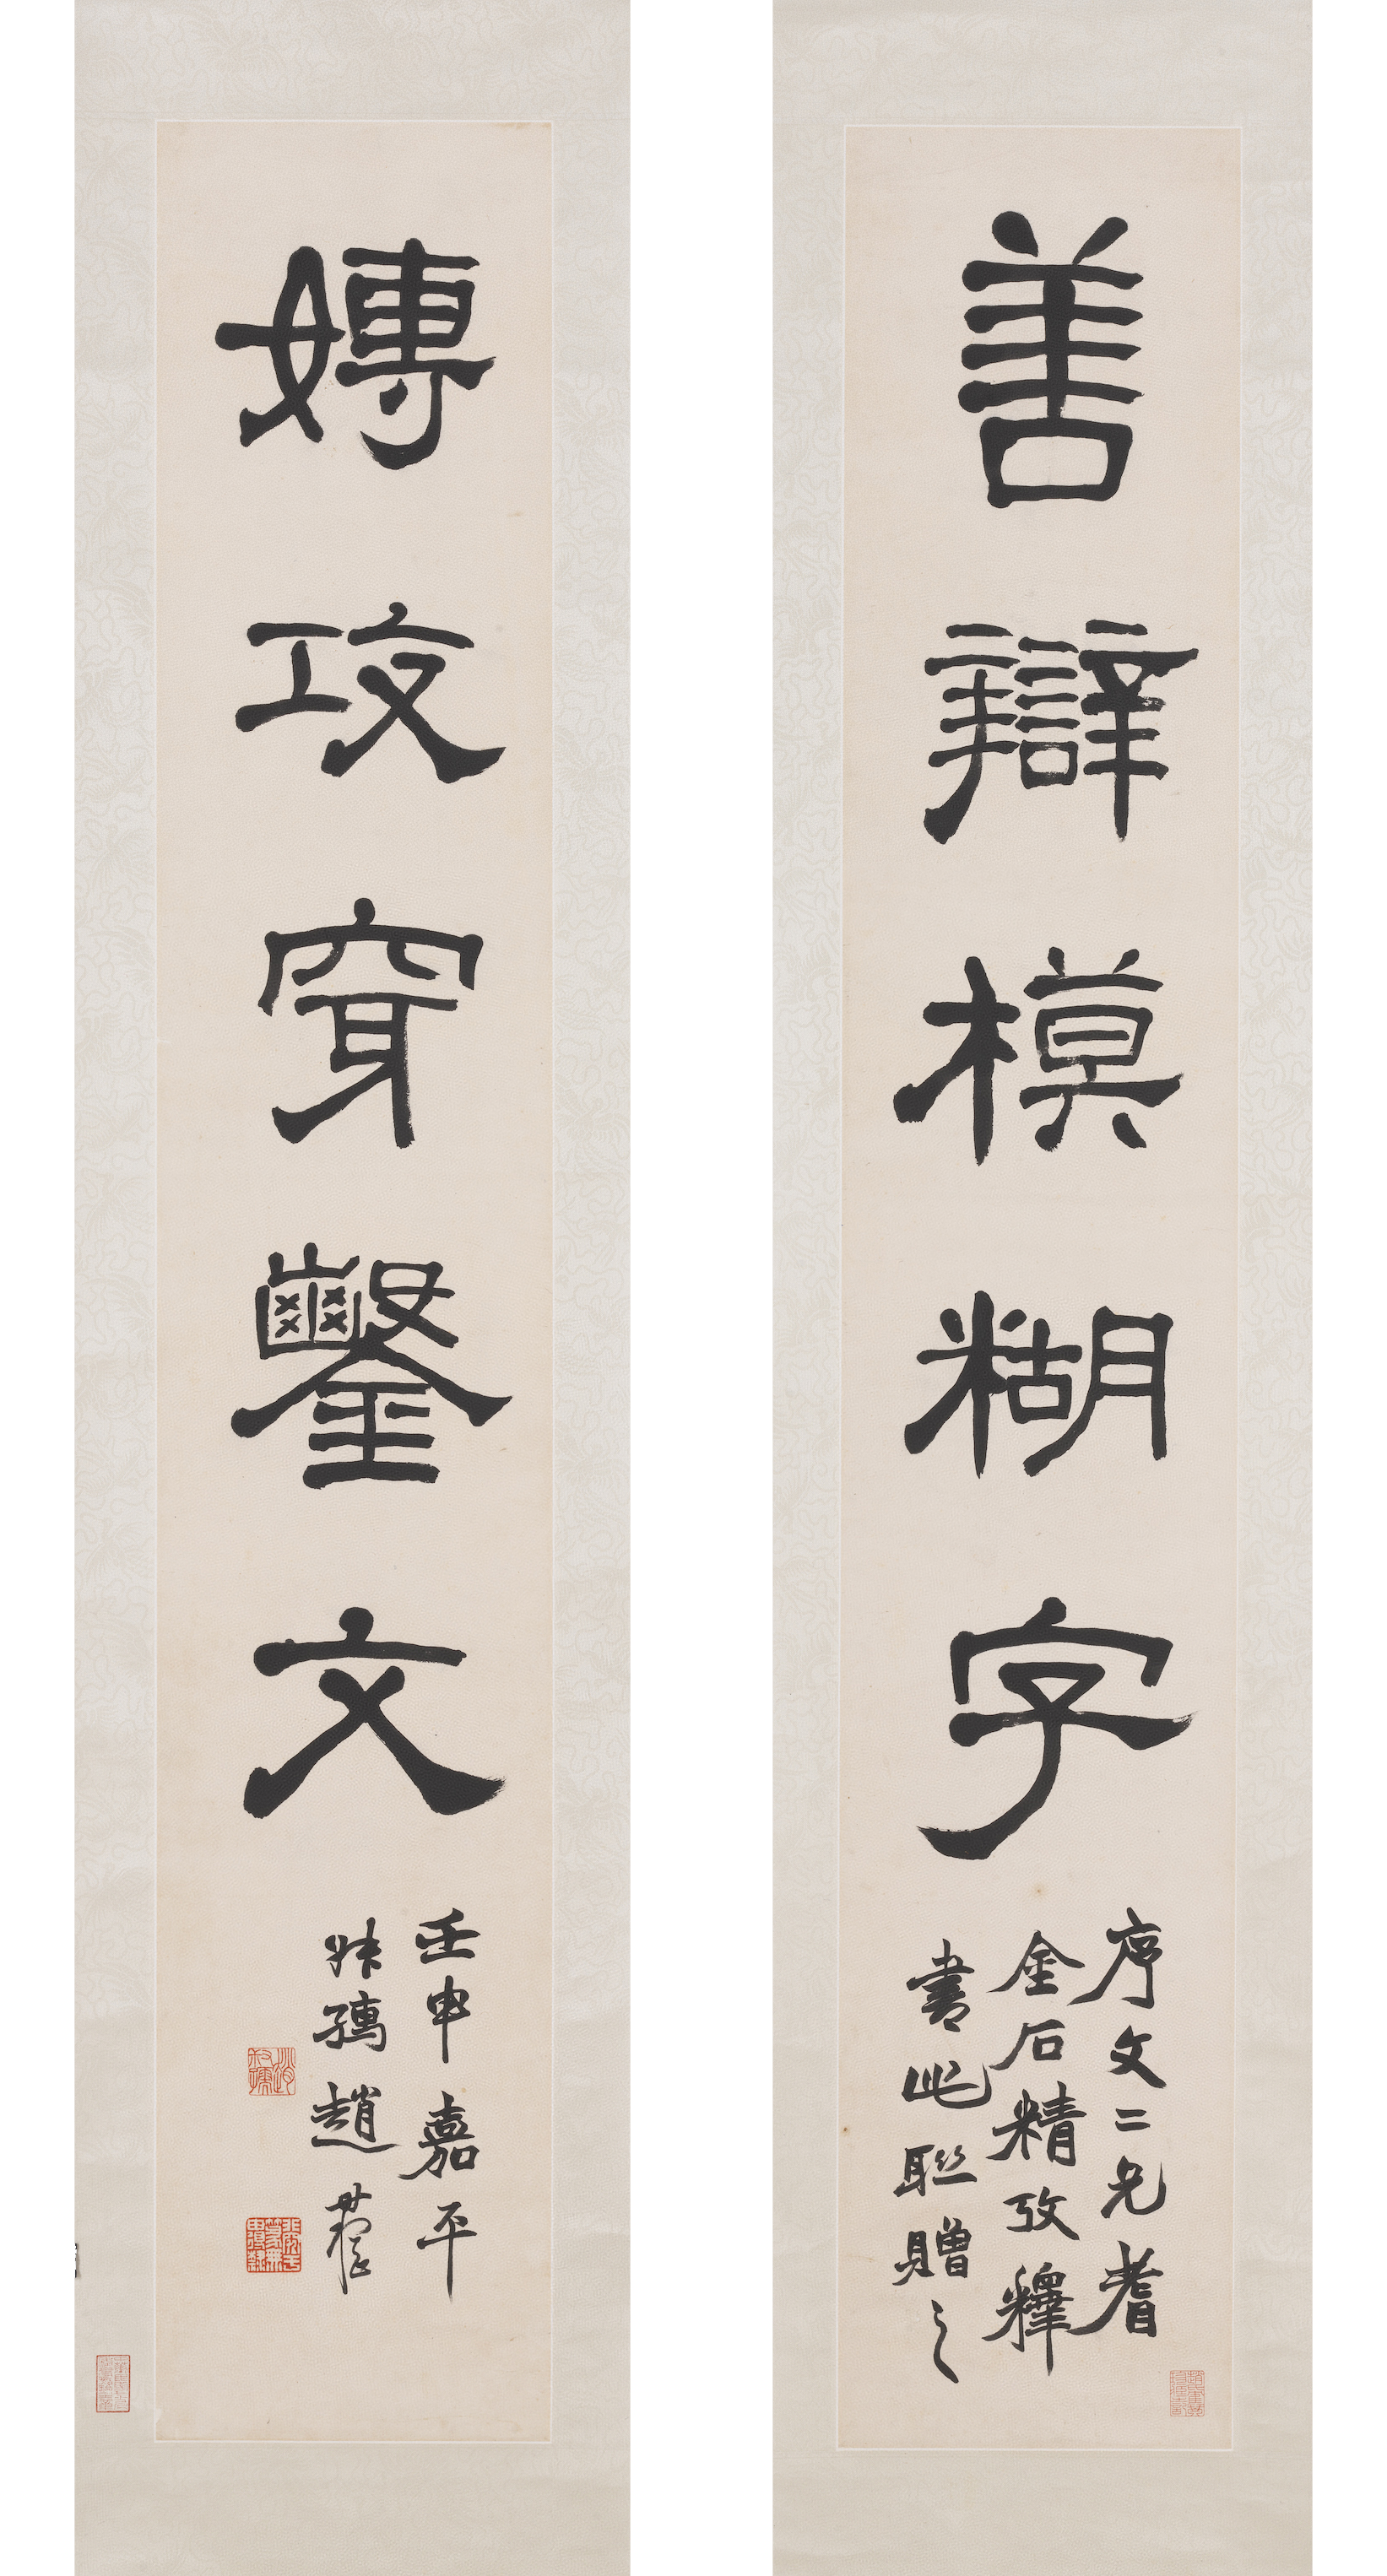 Five-Character Couplet in Clerical Script